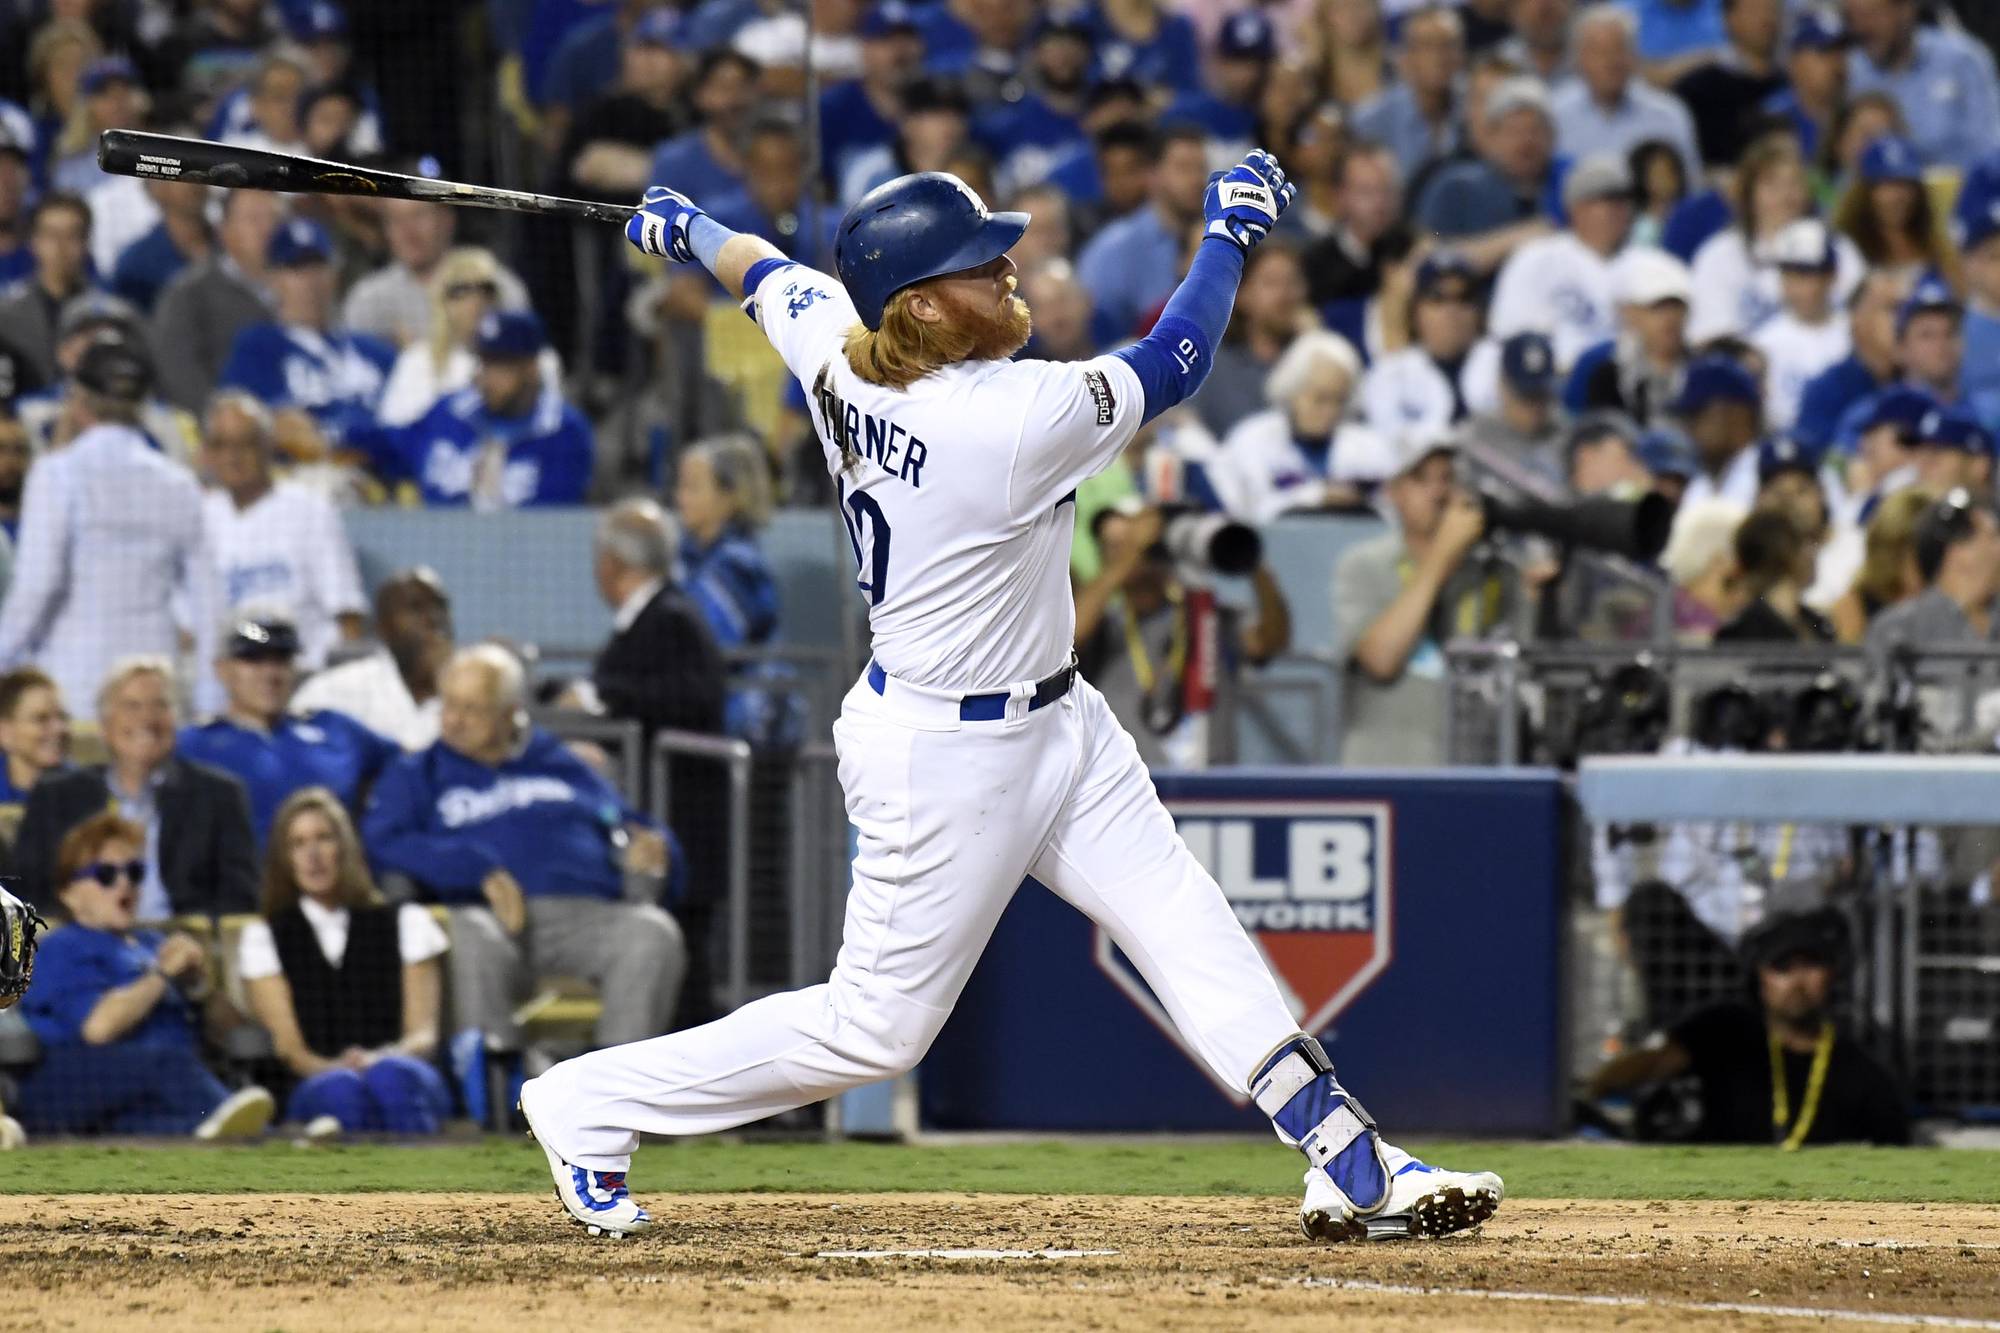 Reports: Dodgers Re-Sign Justin Turner to Four-Year, $64 Million Deal